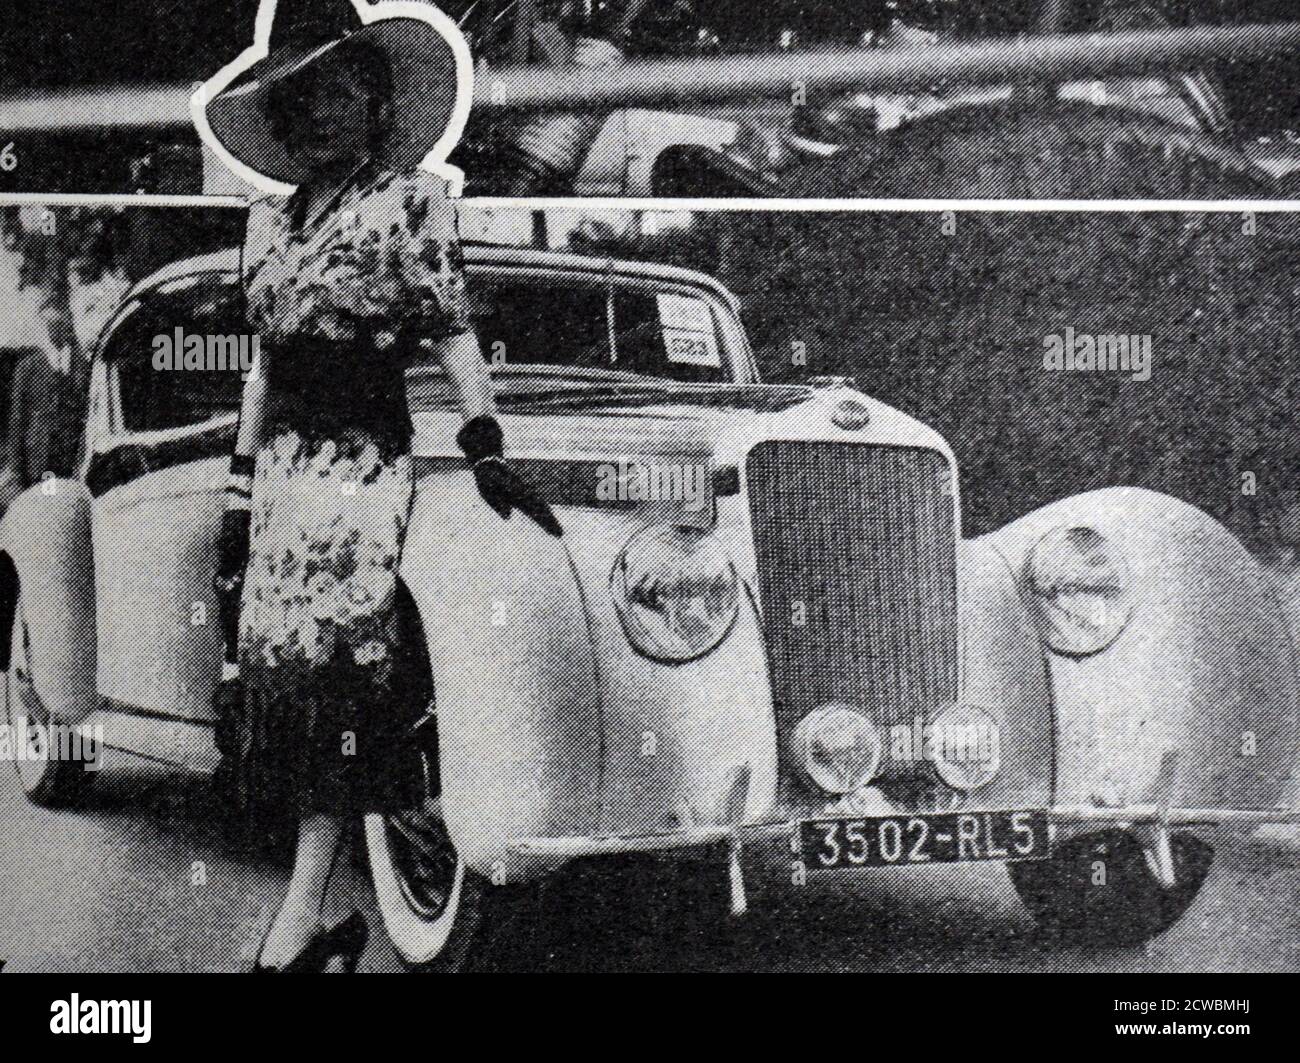 Black and white photograph pertaining to the achievements in automobile manufacturing in 1938; a competition of luxury automobiles. A well-dressed woman stands next to a new car. Stock Photo